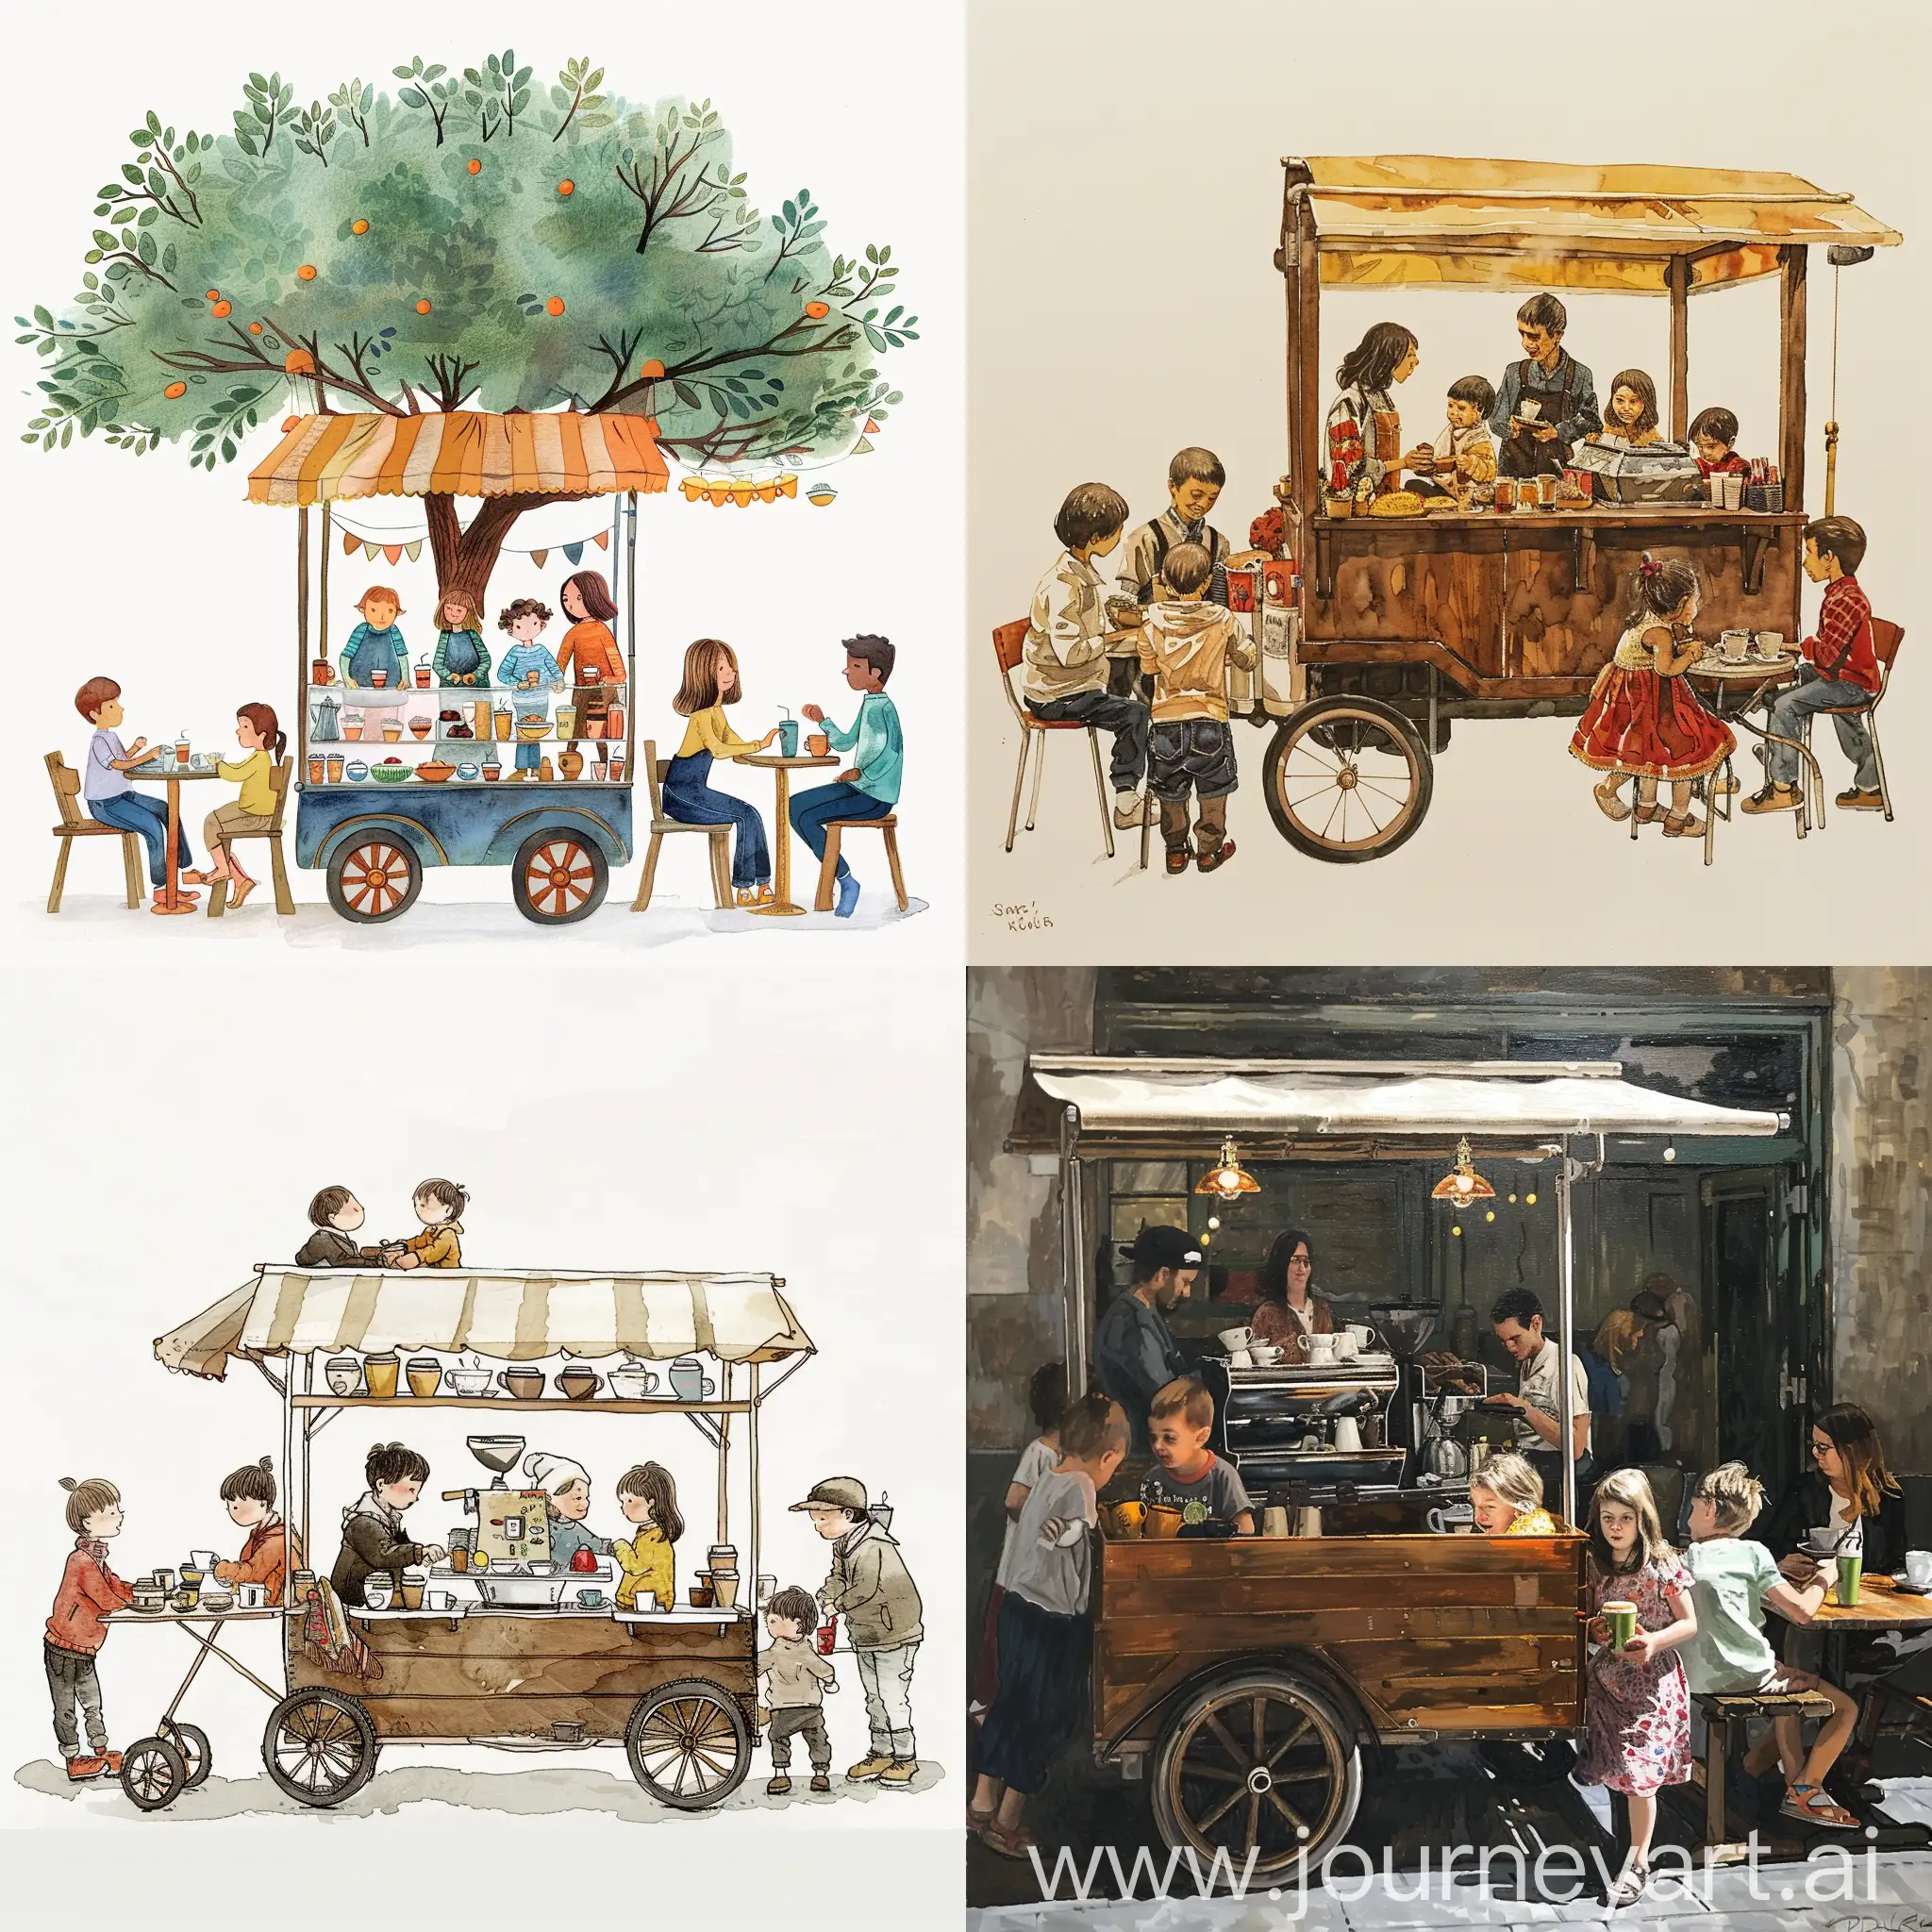 Community-Gathering-at-a-Vibrant-Coffee-Cart